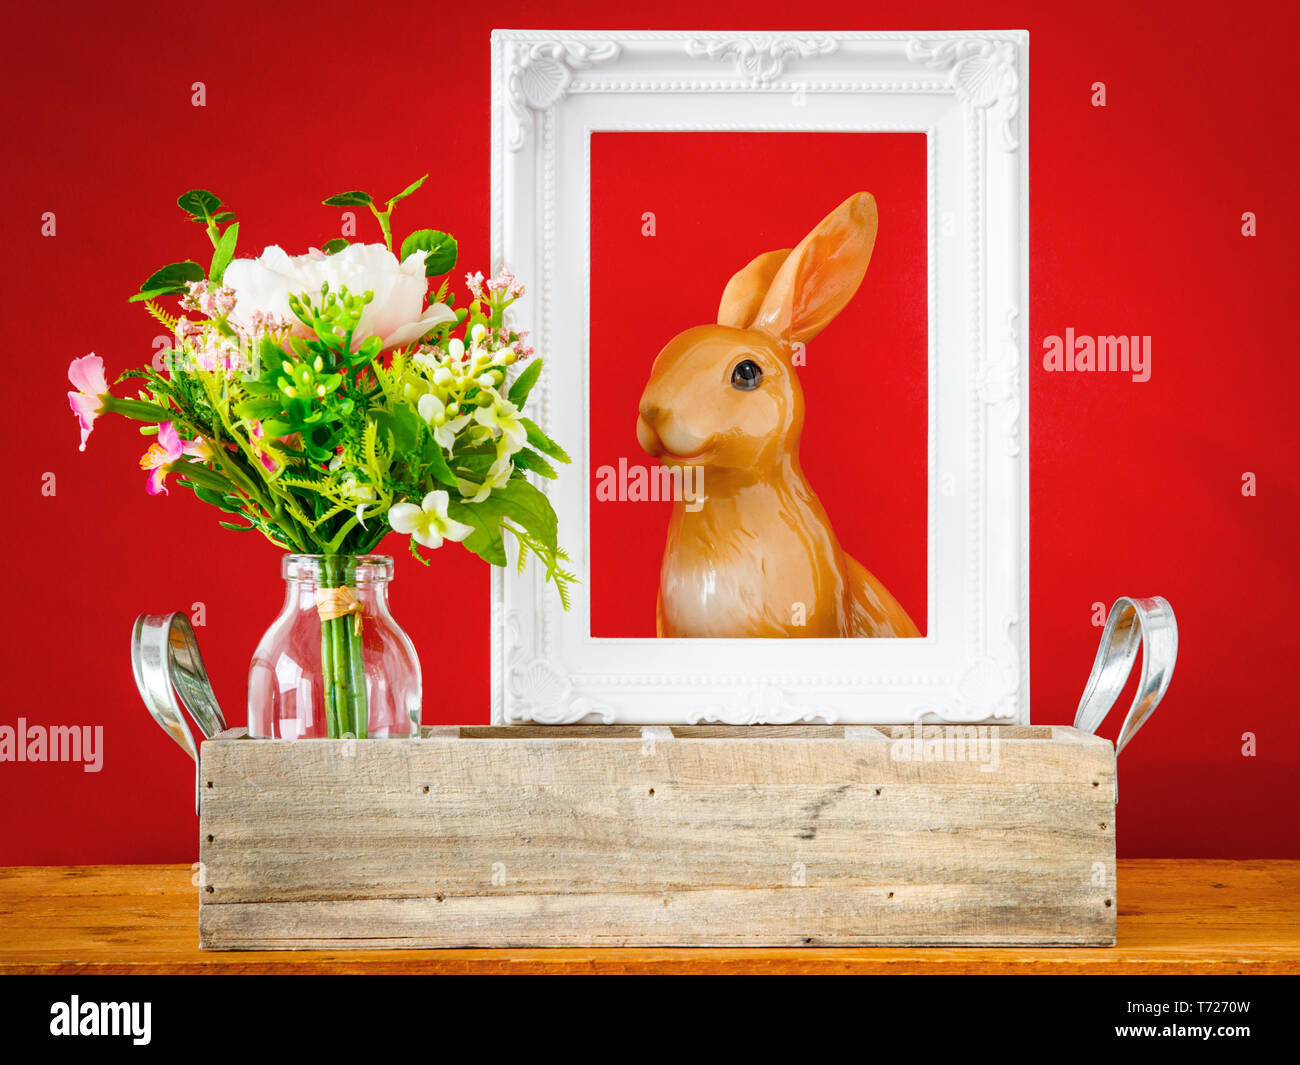 artificially bunch of flowers easter bunny holiday decoration background Stock Photo